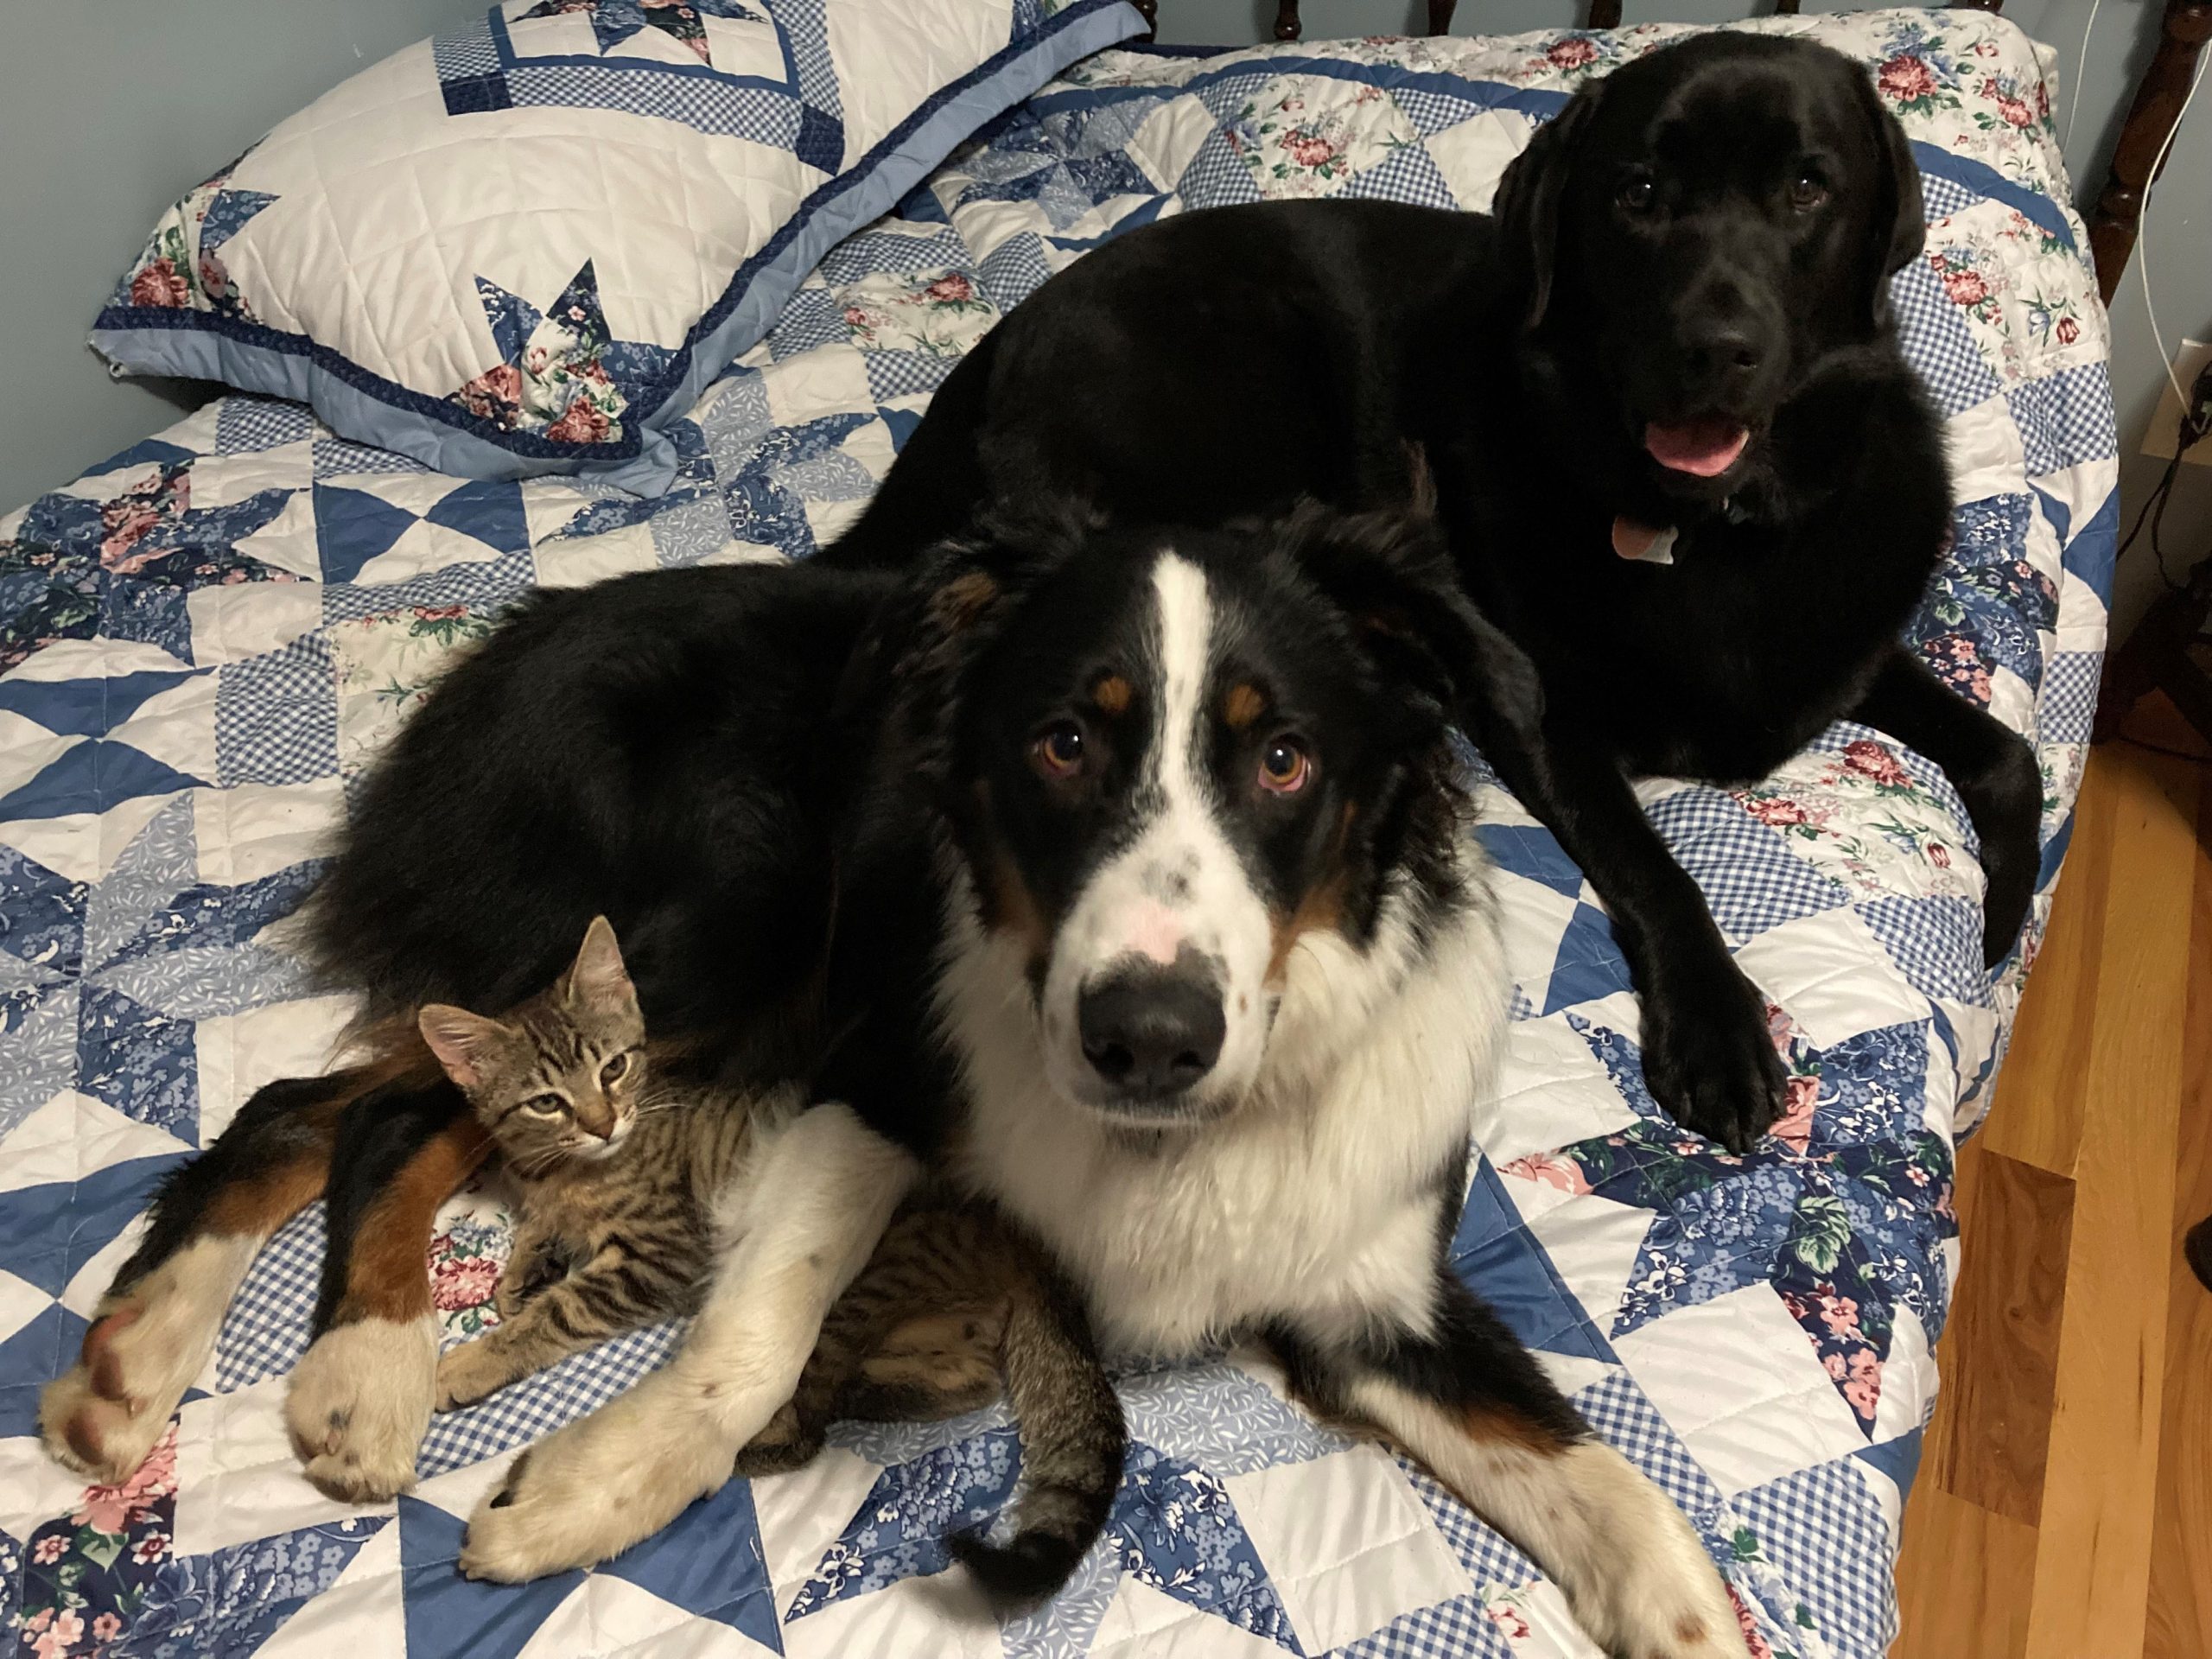 Two dogs and a cat sitting on a bed.